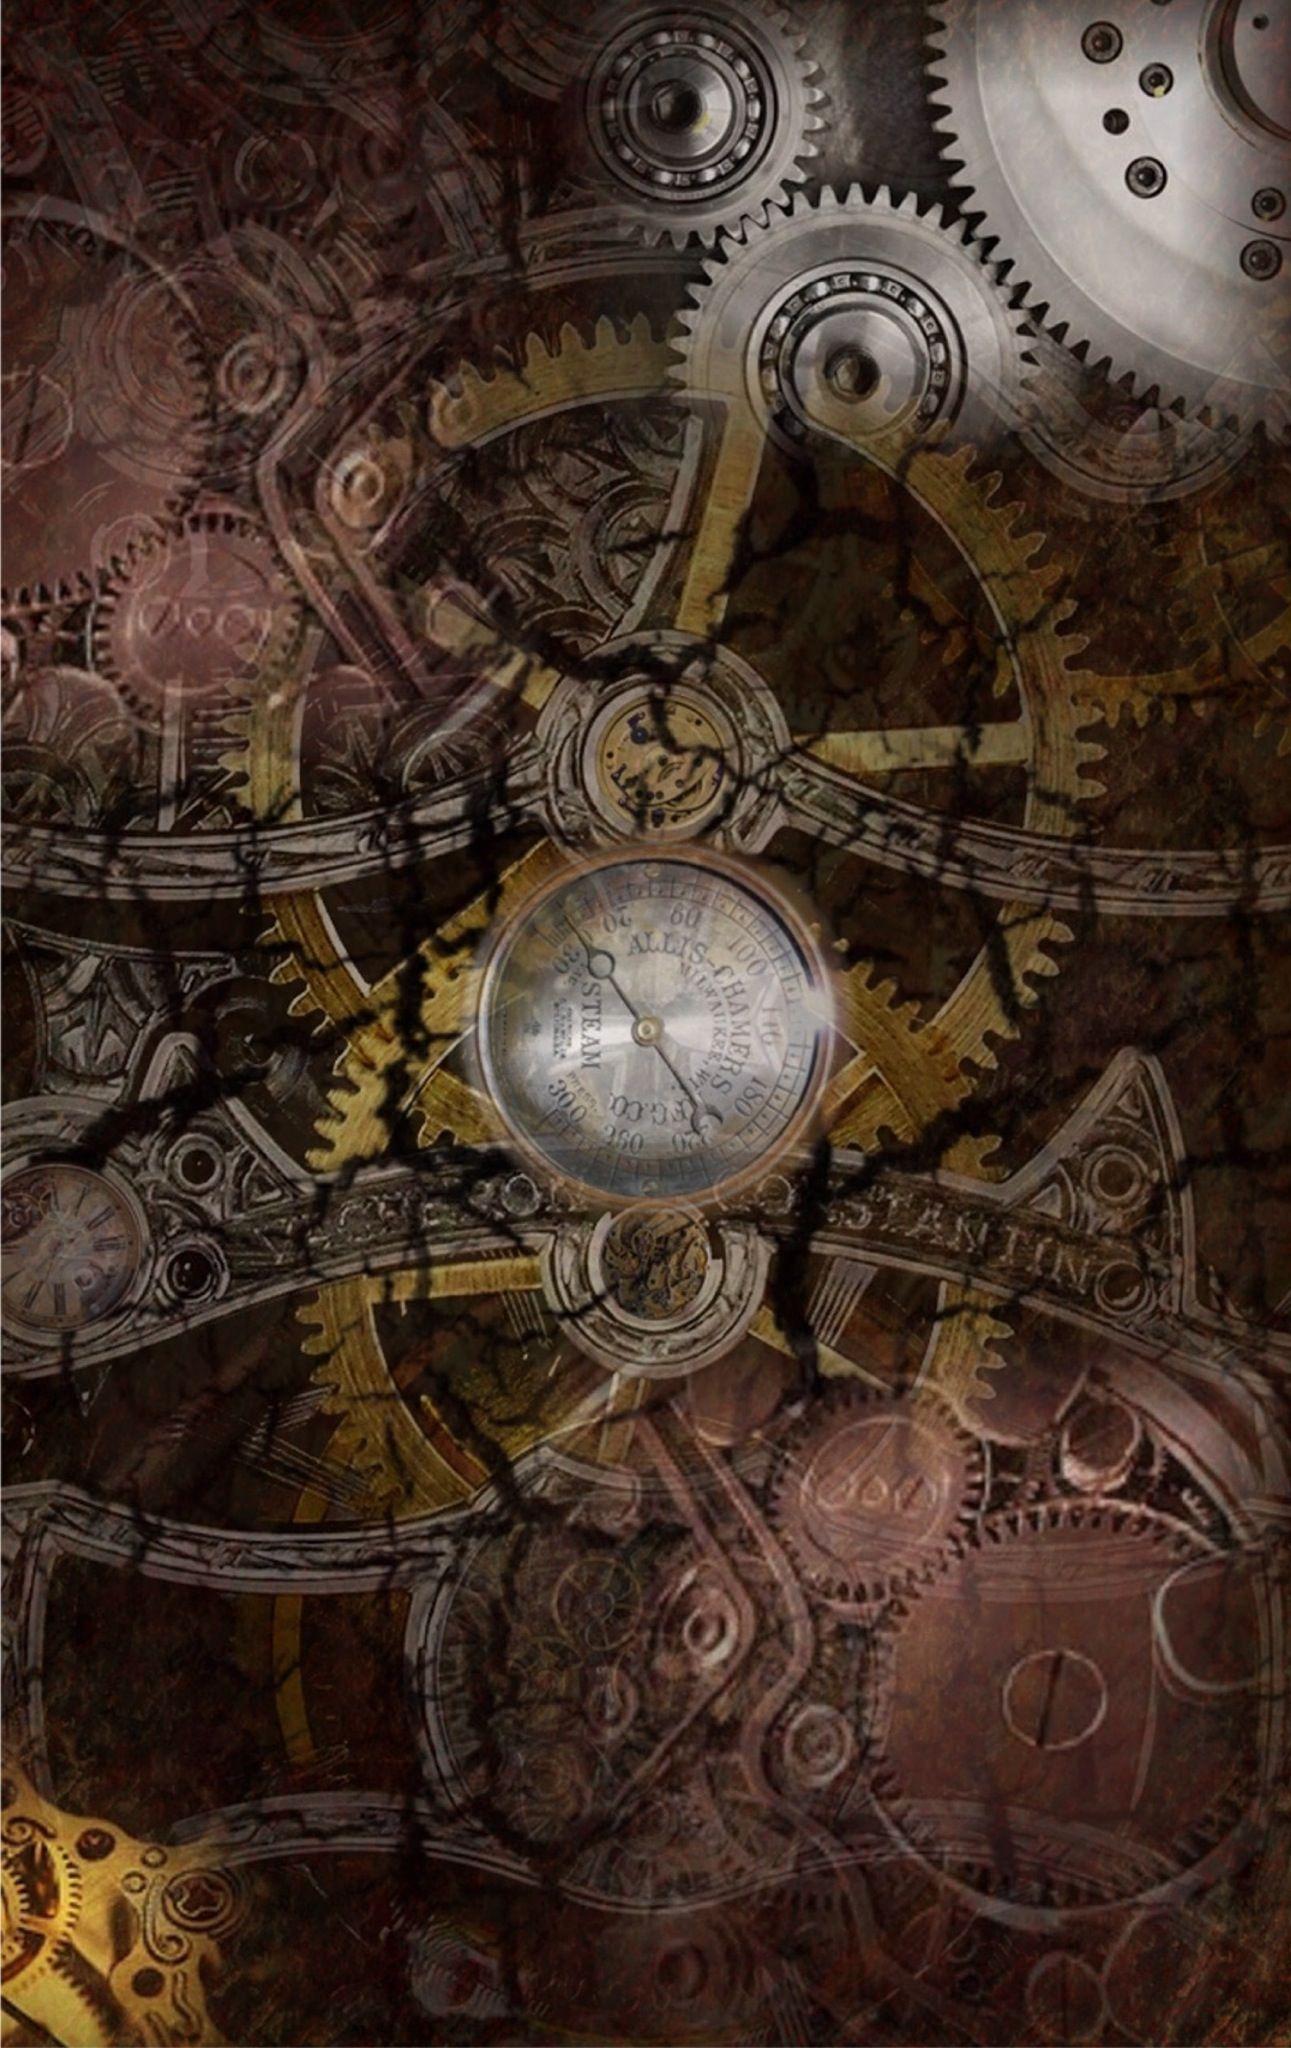 Steampunk iPhone 6 wallpaper, I love the gears and the - Steampunk